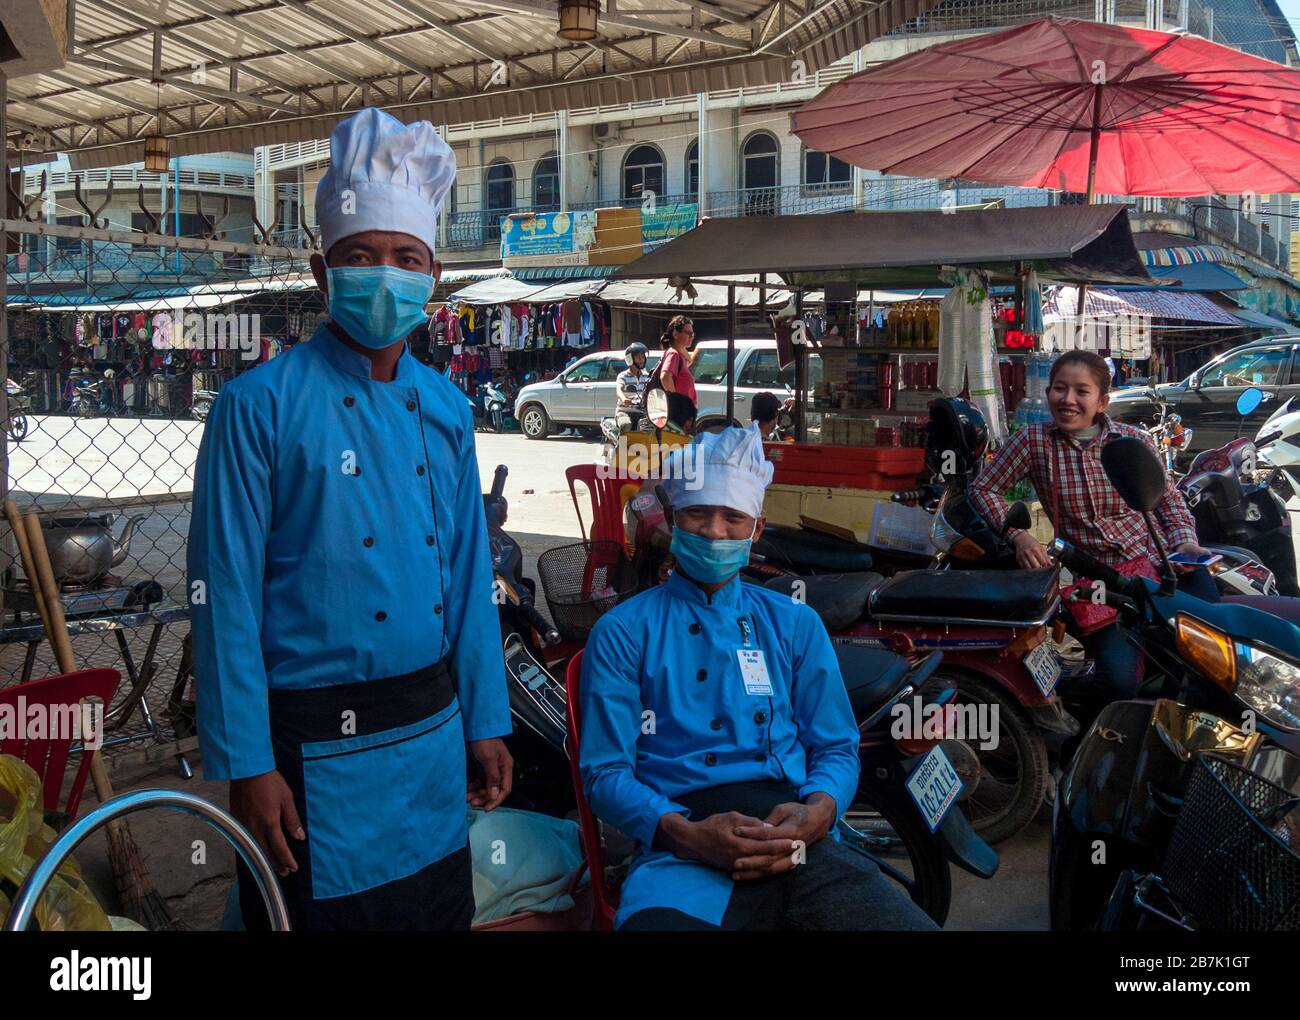 Battambang, Cambodia, Asia: two chefs with masks and a smiling girl during a work break Stock Photo